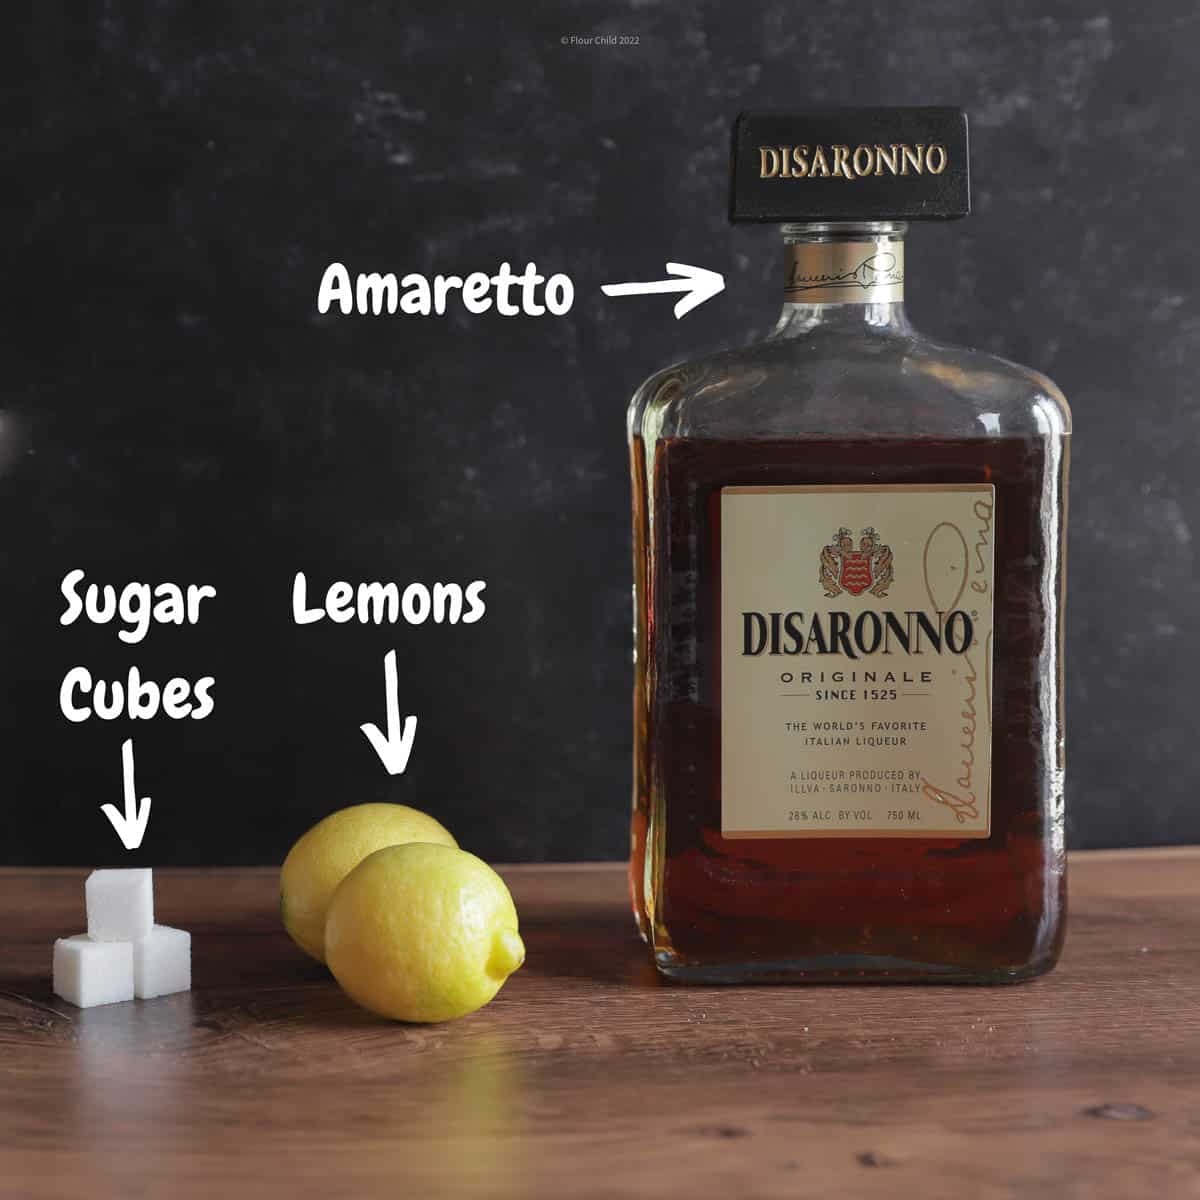 The three main ingredients used to mix a sour, liqueur lemon and sugar. Add a maraschino cherry for garnish.